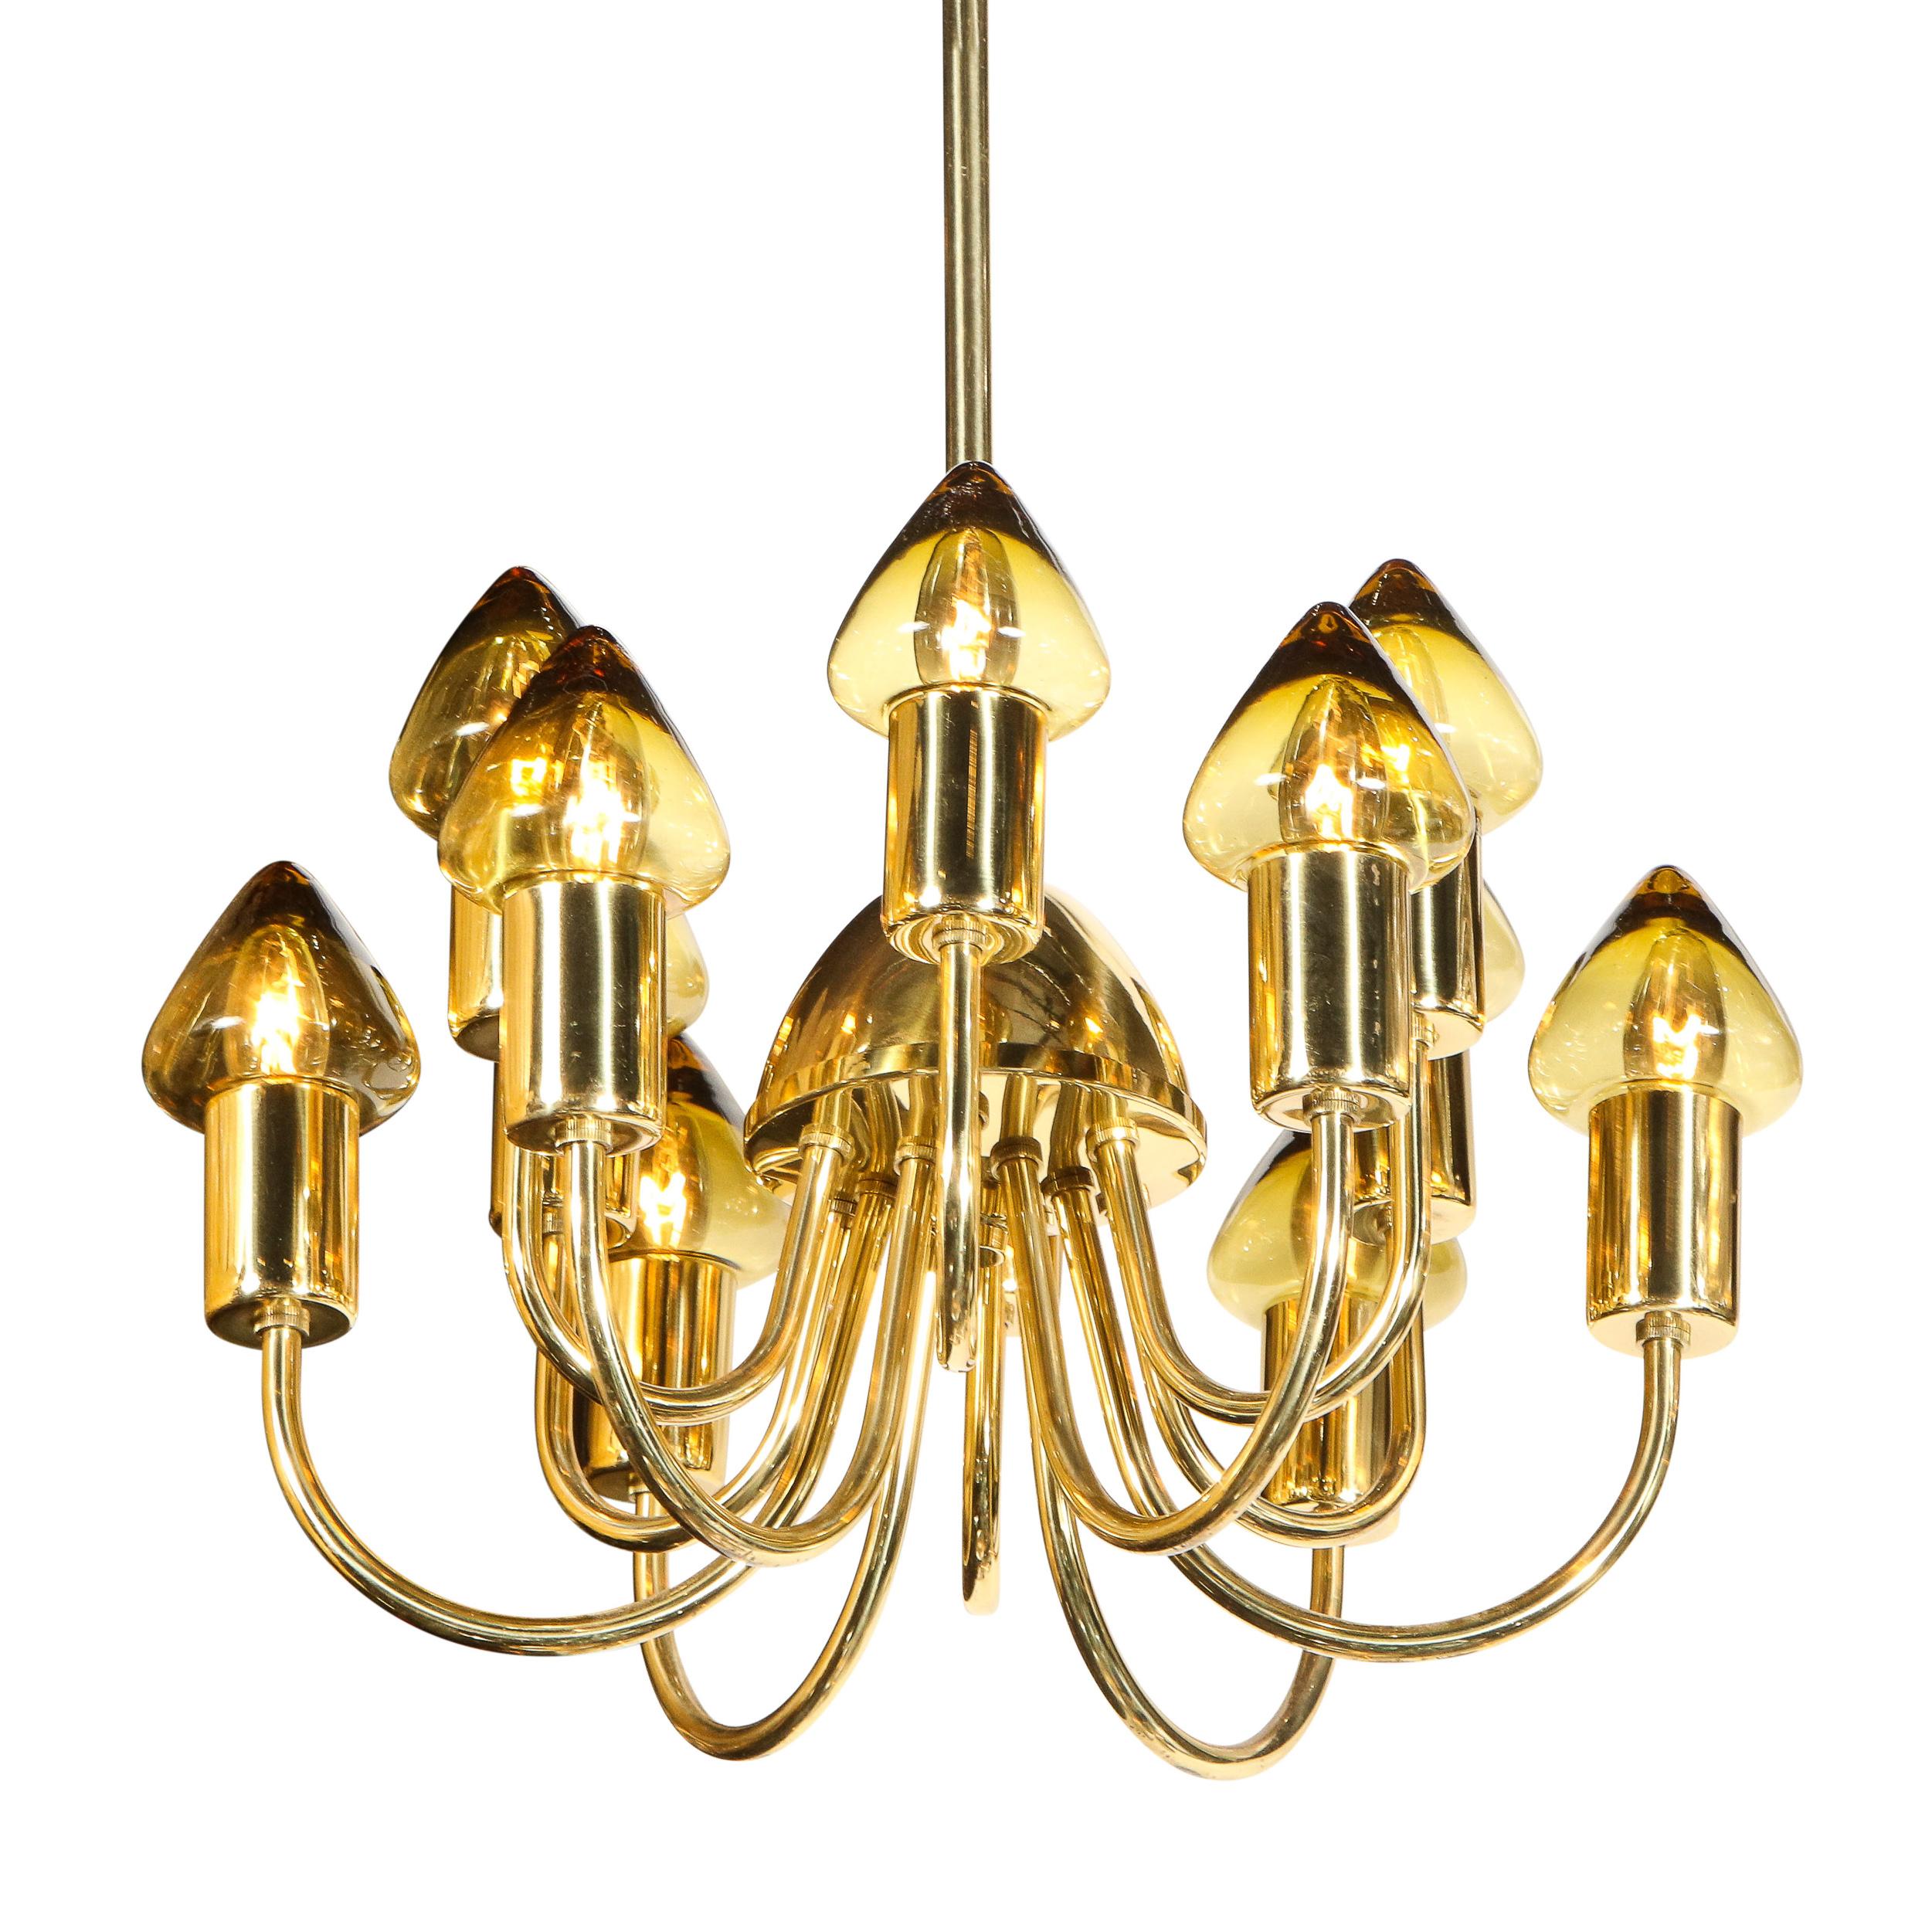 This refined Scandinavian Mid-Century Modern chandelier was realized circa 1960 by the celebrated Swedish designer Hans-Agne Jakobsson. Active between 1950 and roughly 1970, often considered the 